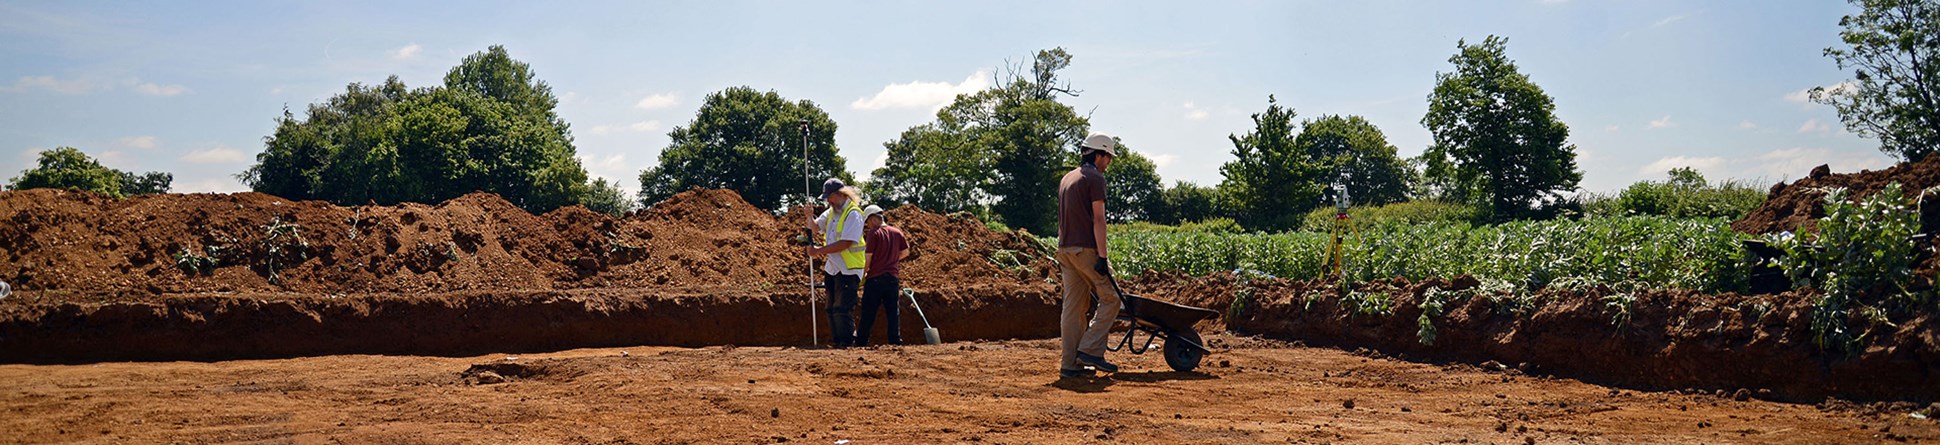 Photo of wide view of excavation trench with spoilheap at rear. In the trench is a man with a wheelbarrow and two surveying